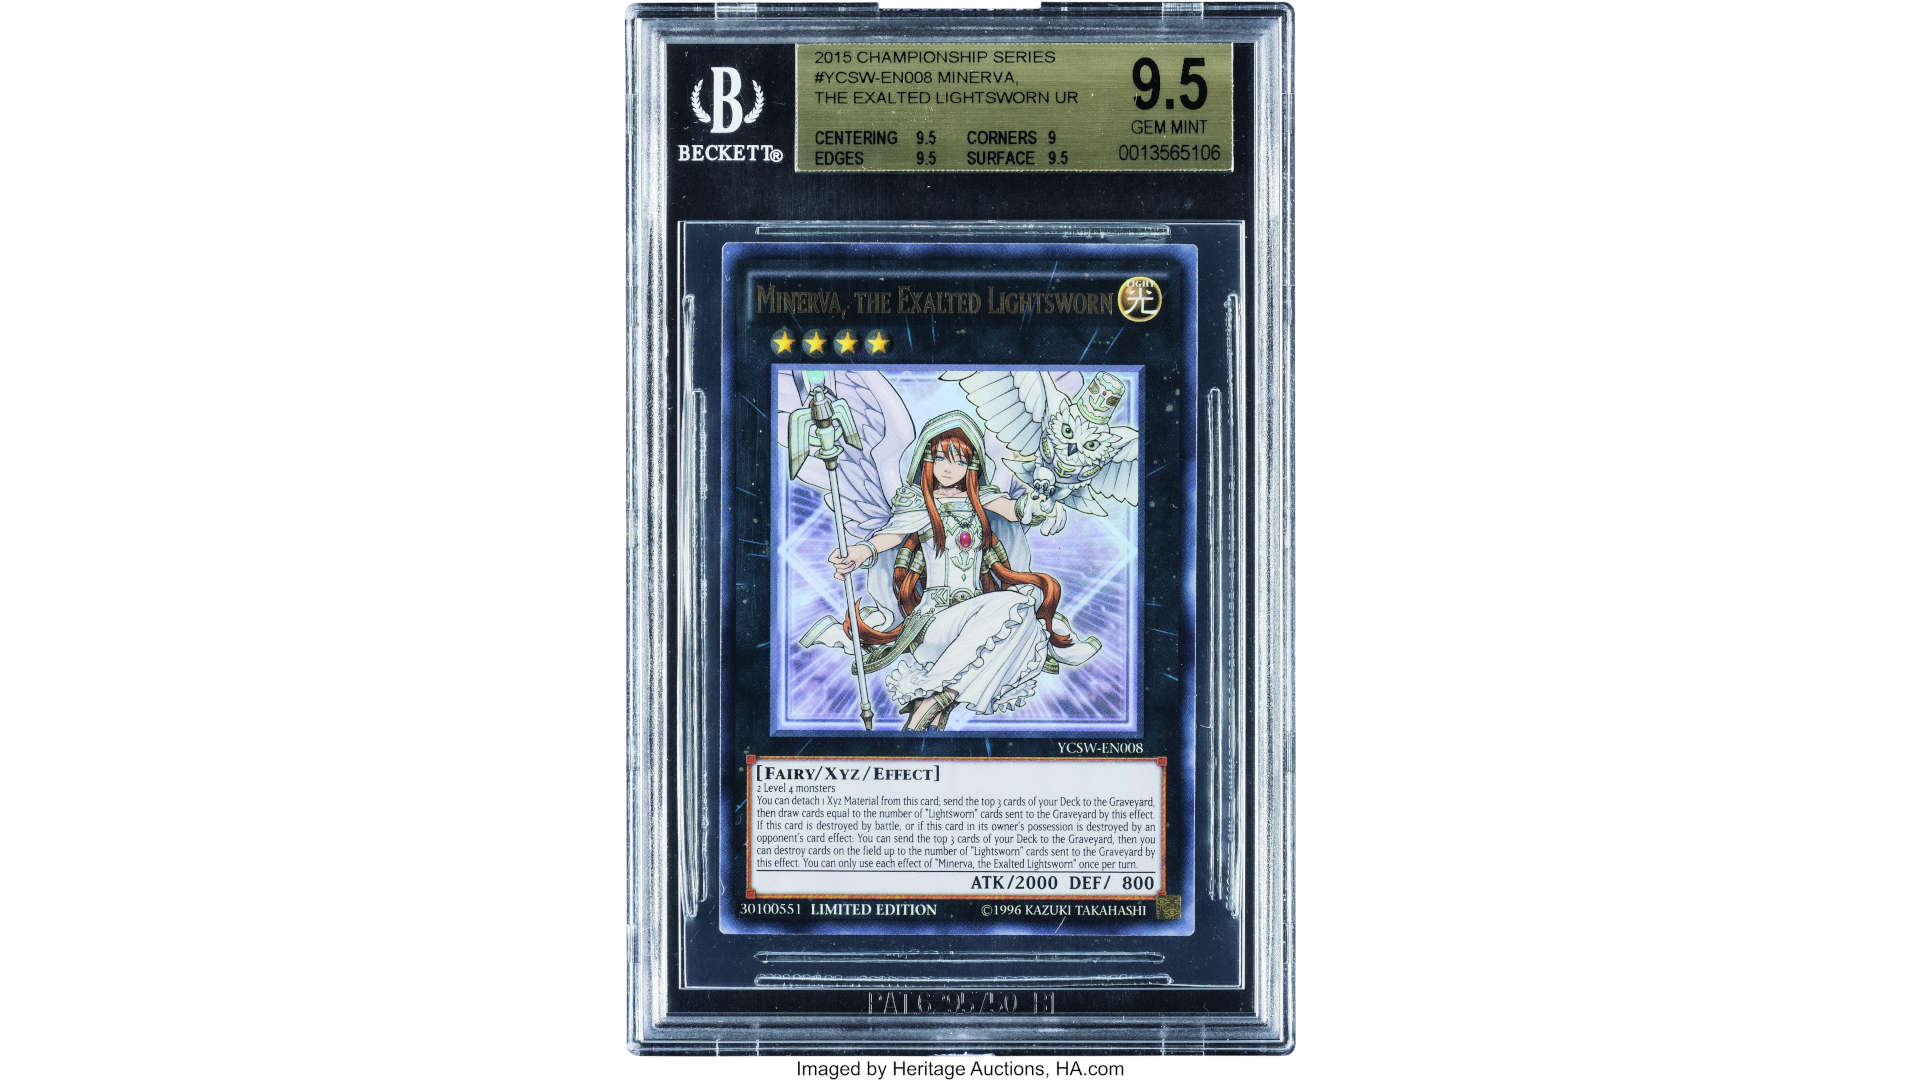 Expensive Yu-Gi-Oh! cards - Minerva Exalted Lightsworn Ultra-rare version from the Yu-Gi-Oh! 2015 championship series